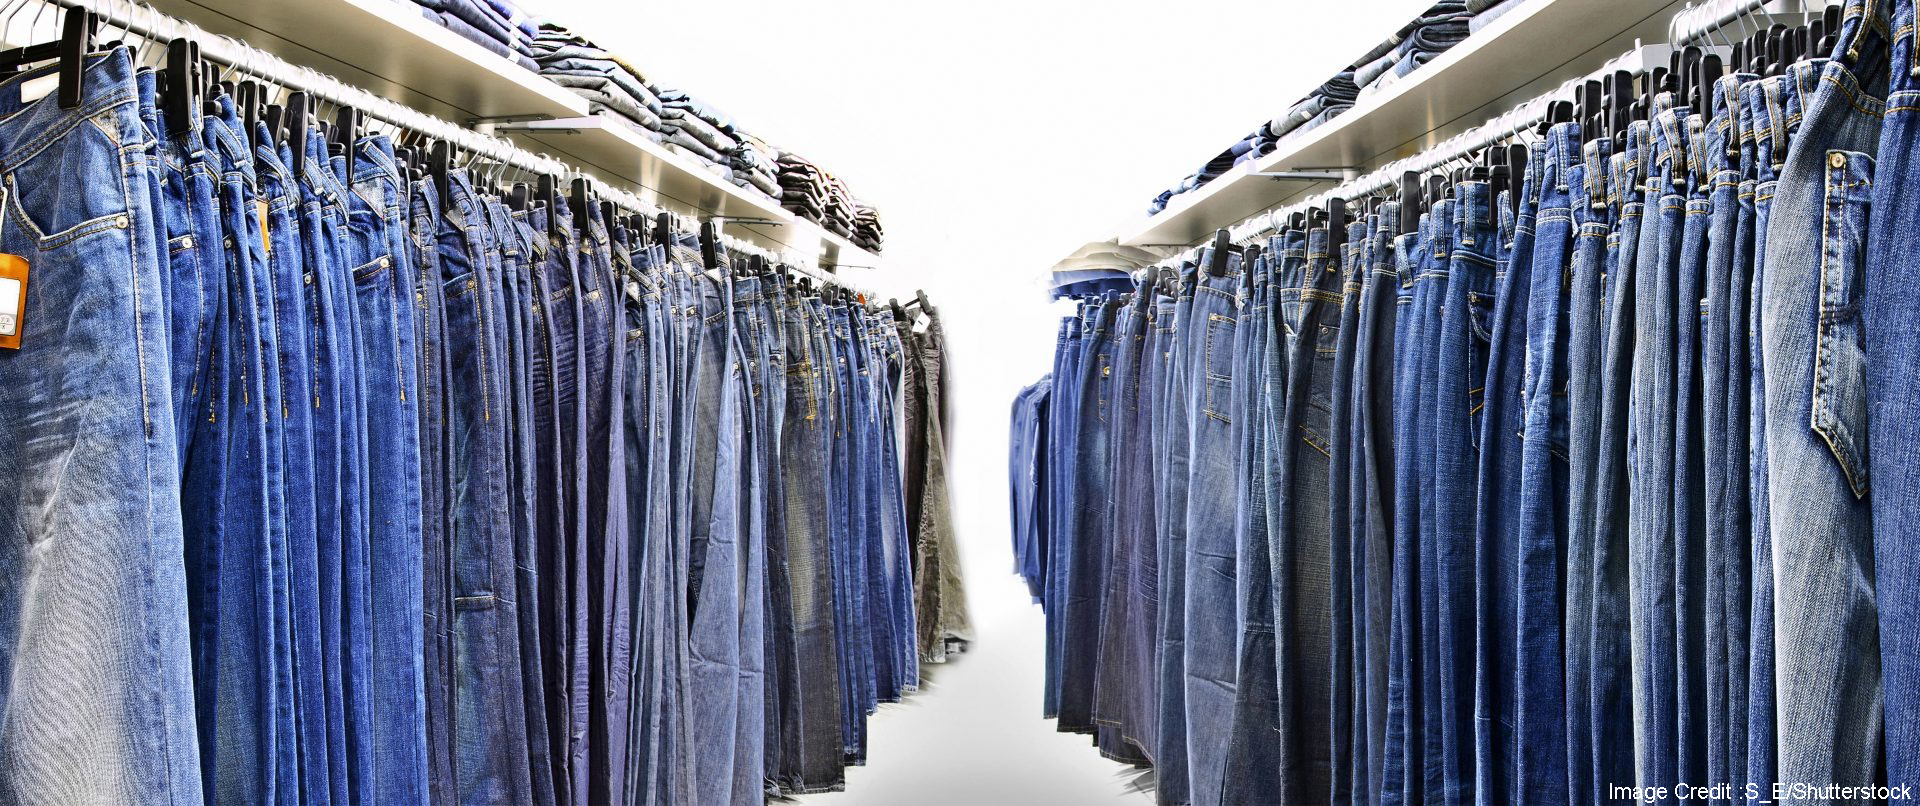 Revolutionary Enzyme Dyeing Method Promises a Sustainable Future for Blue Jeans